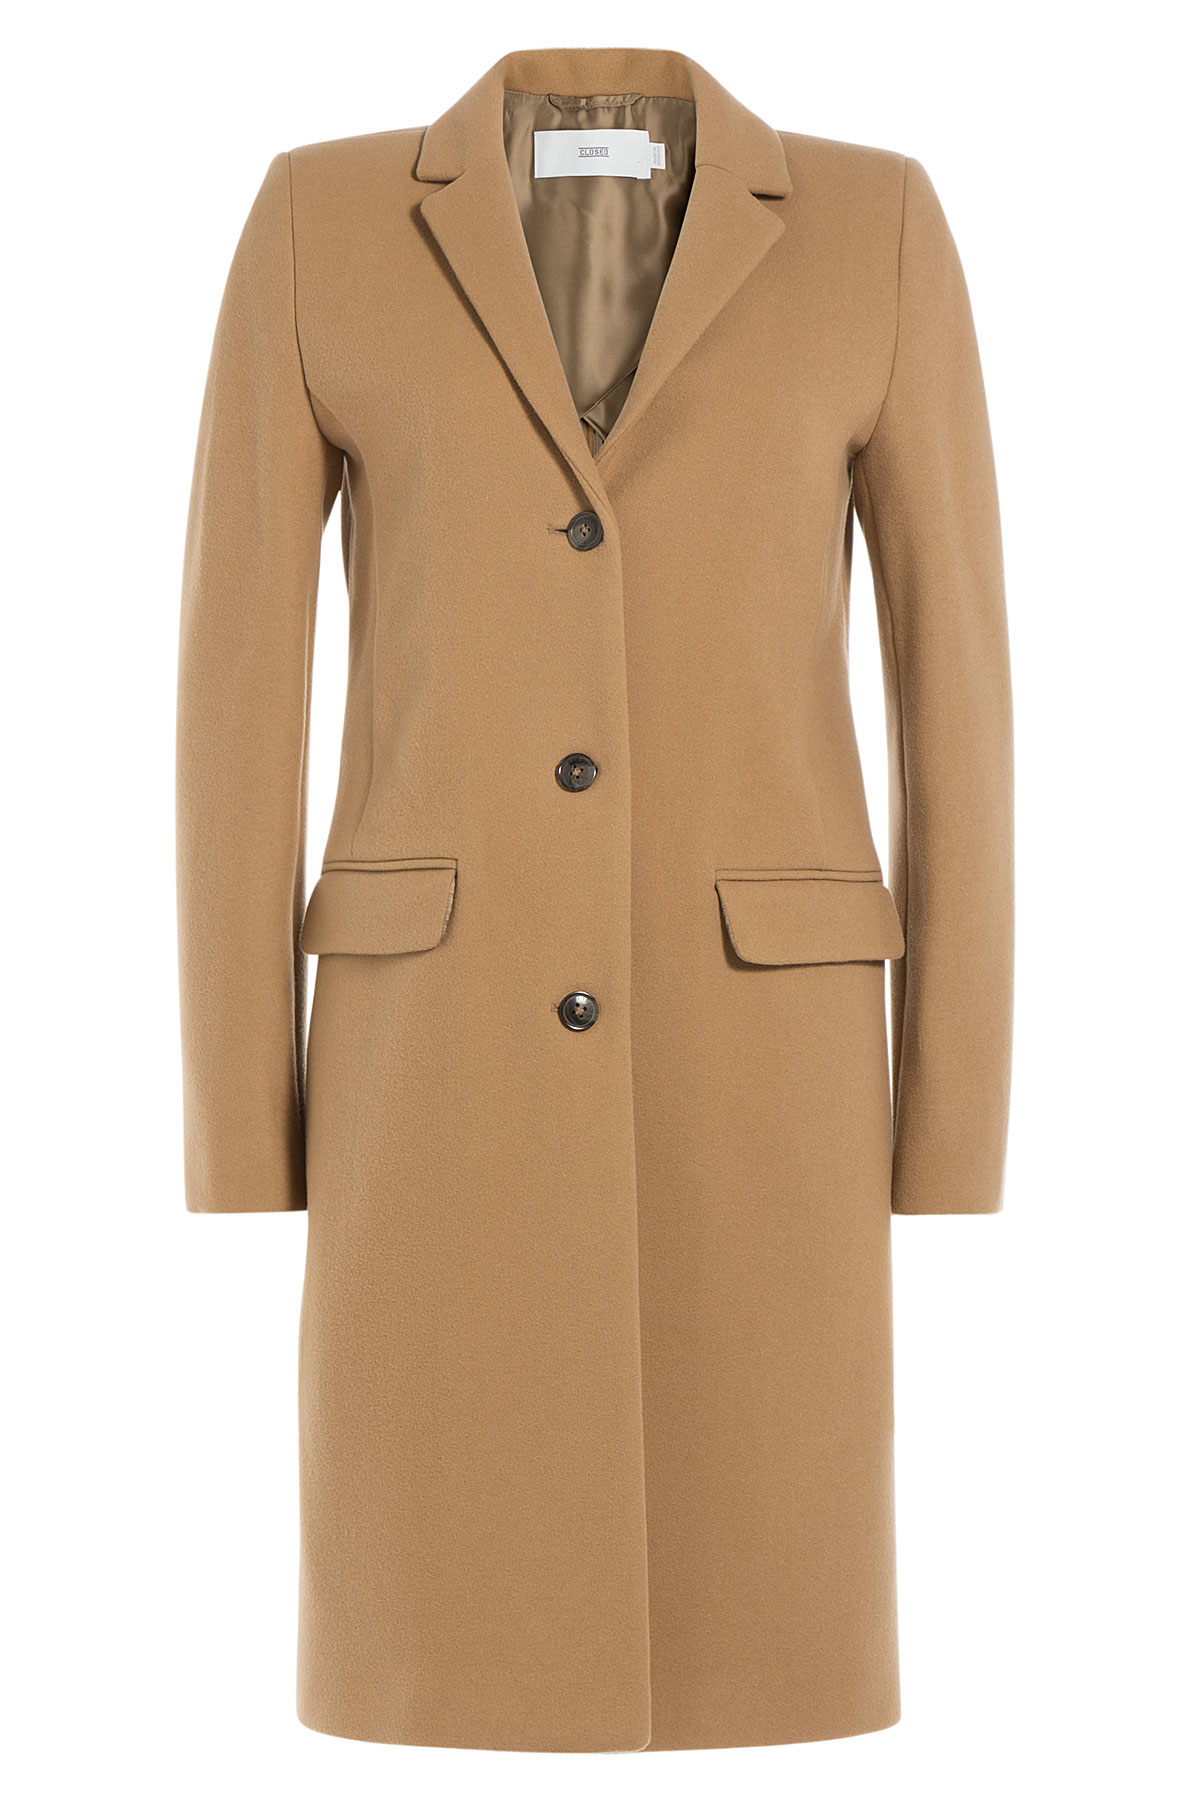 Lyst - Closed Wool Blend Coat - Camel in Brown